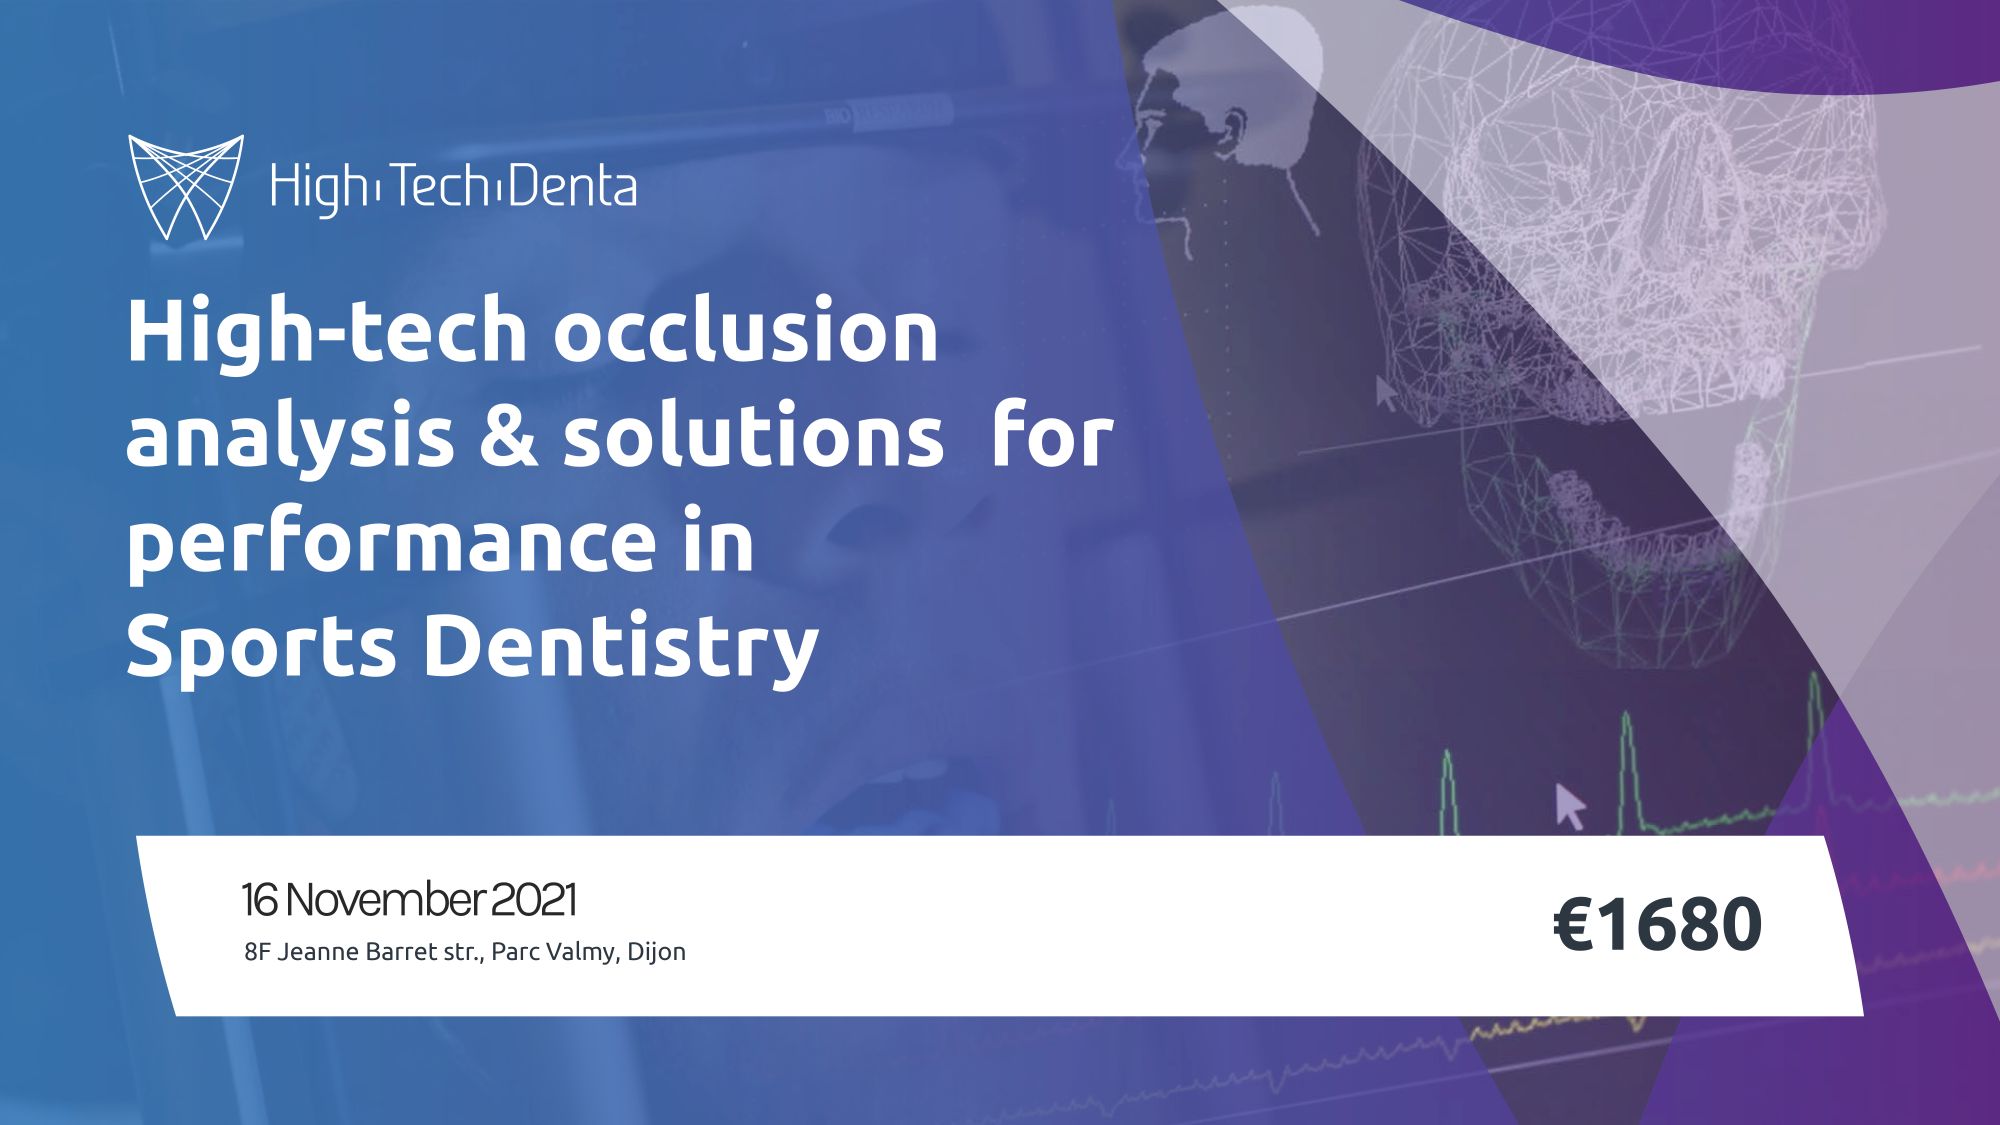 http://HIGH-TECH%20OCCLUSION%20ANALYSIS%20&%20SOLUTIONS%20FOR%20PERFORMANCE%20IN%20SPORT%20DENTISTRY